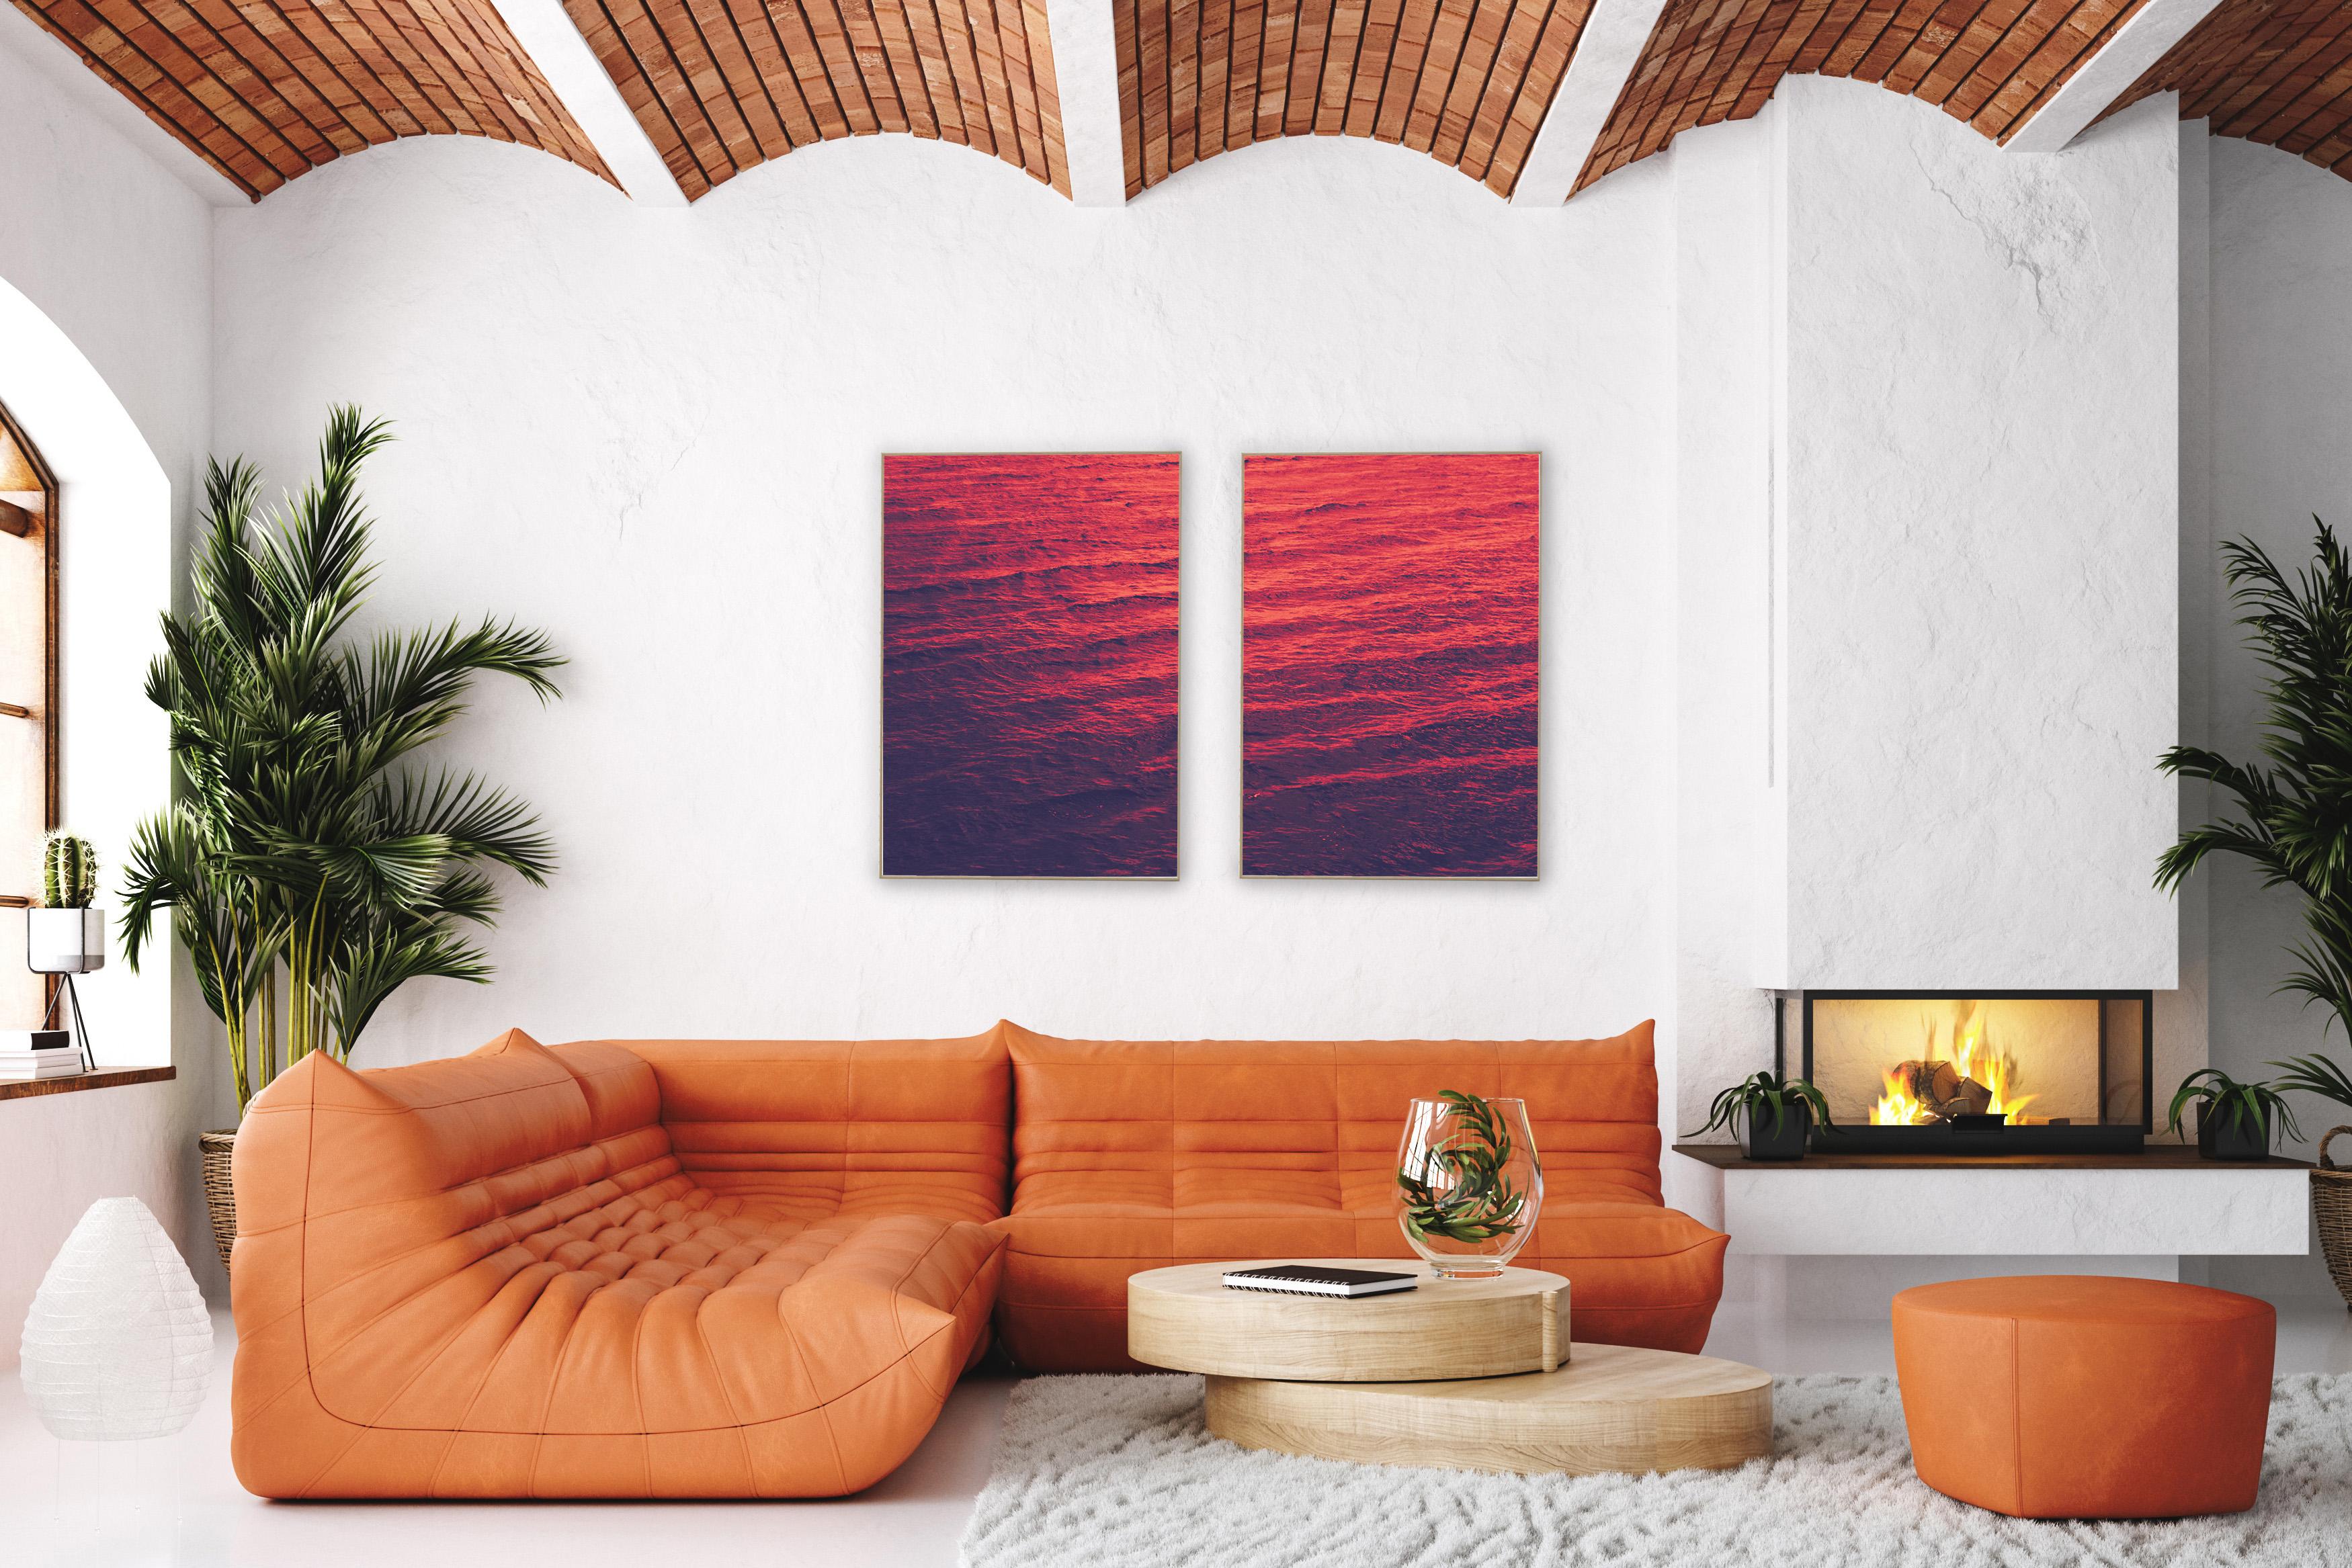 Red Sea, Abstract Diptych, Giclée Print Golden Pink, Blue Mediterranean Seascape - Contemporary Photograph by Ryan Rivadeneyra